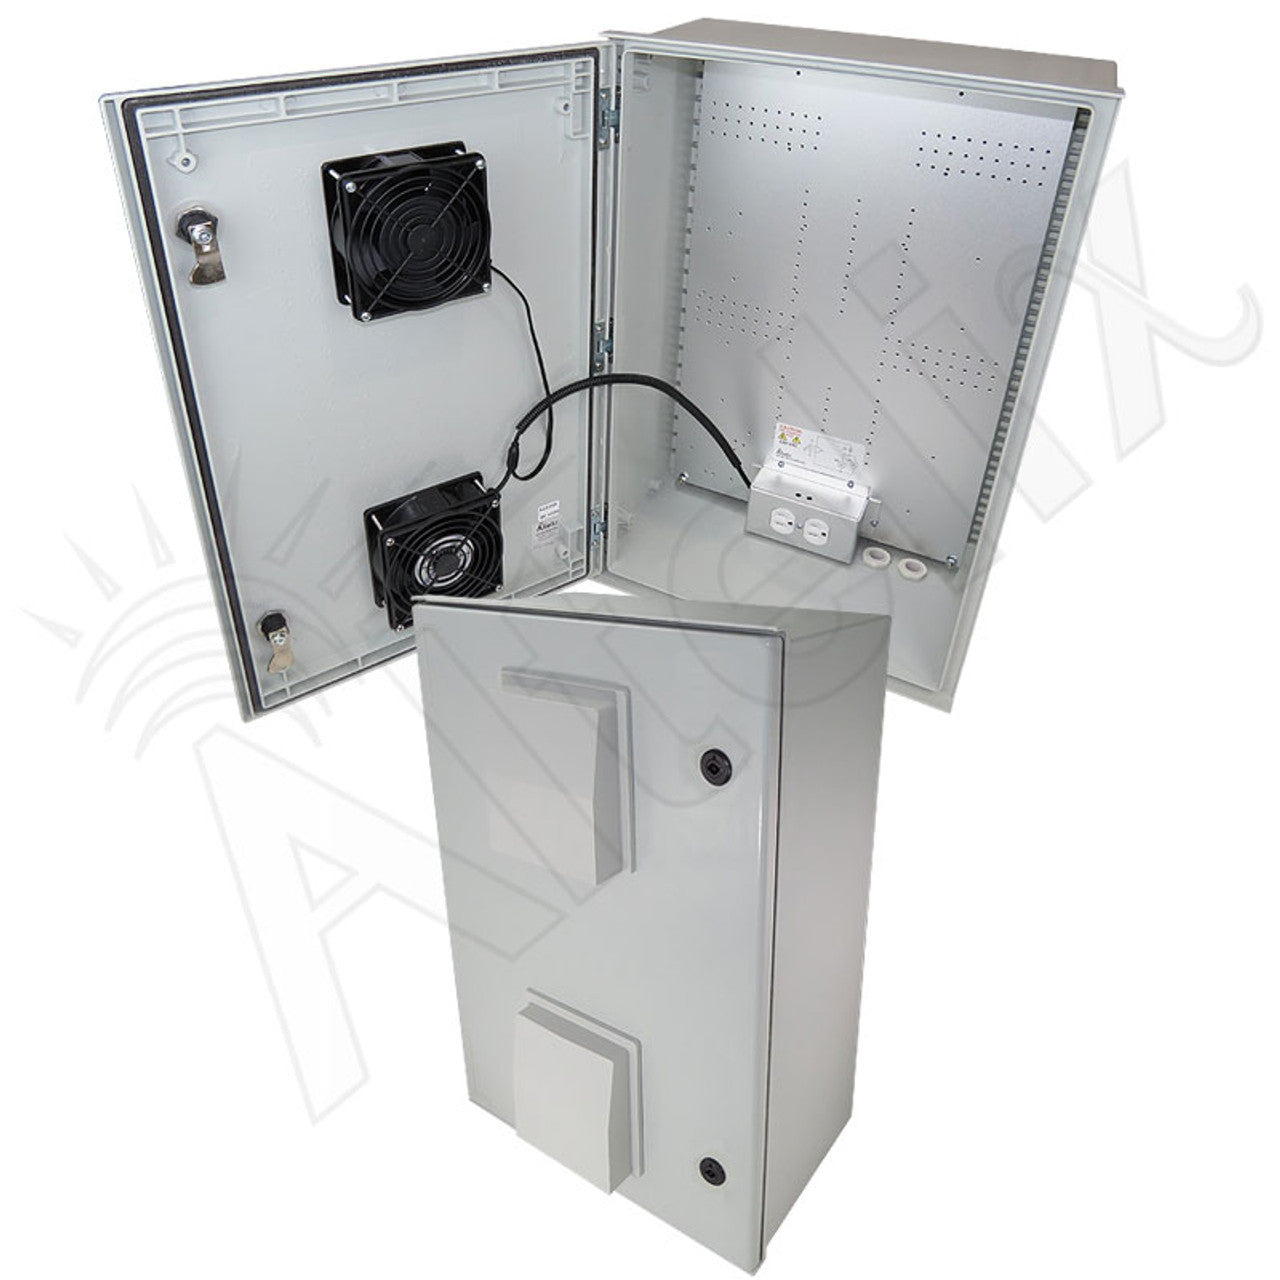 Altelix Vented Fiberglass Weatherproof NEMA Enclosure with Cooling Fan, 200W Heater and 120 VAC Outlets